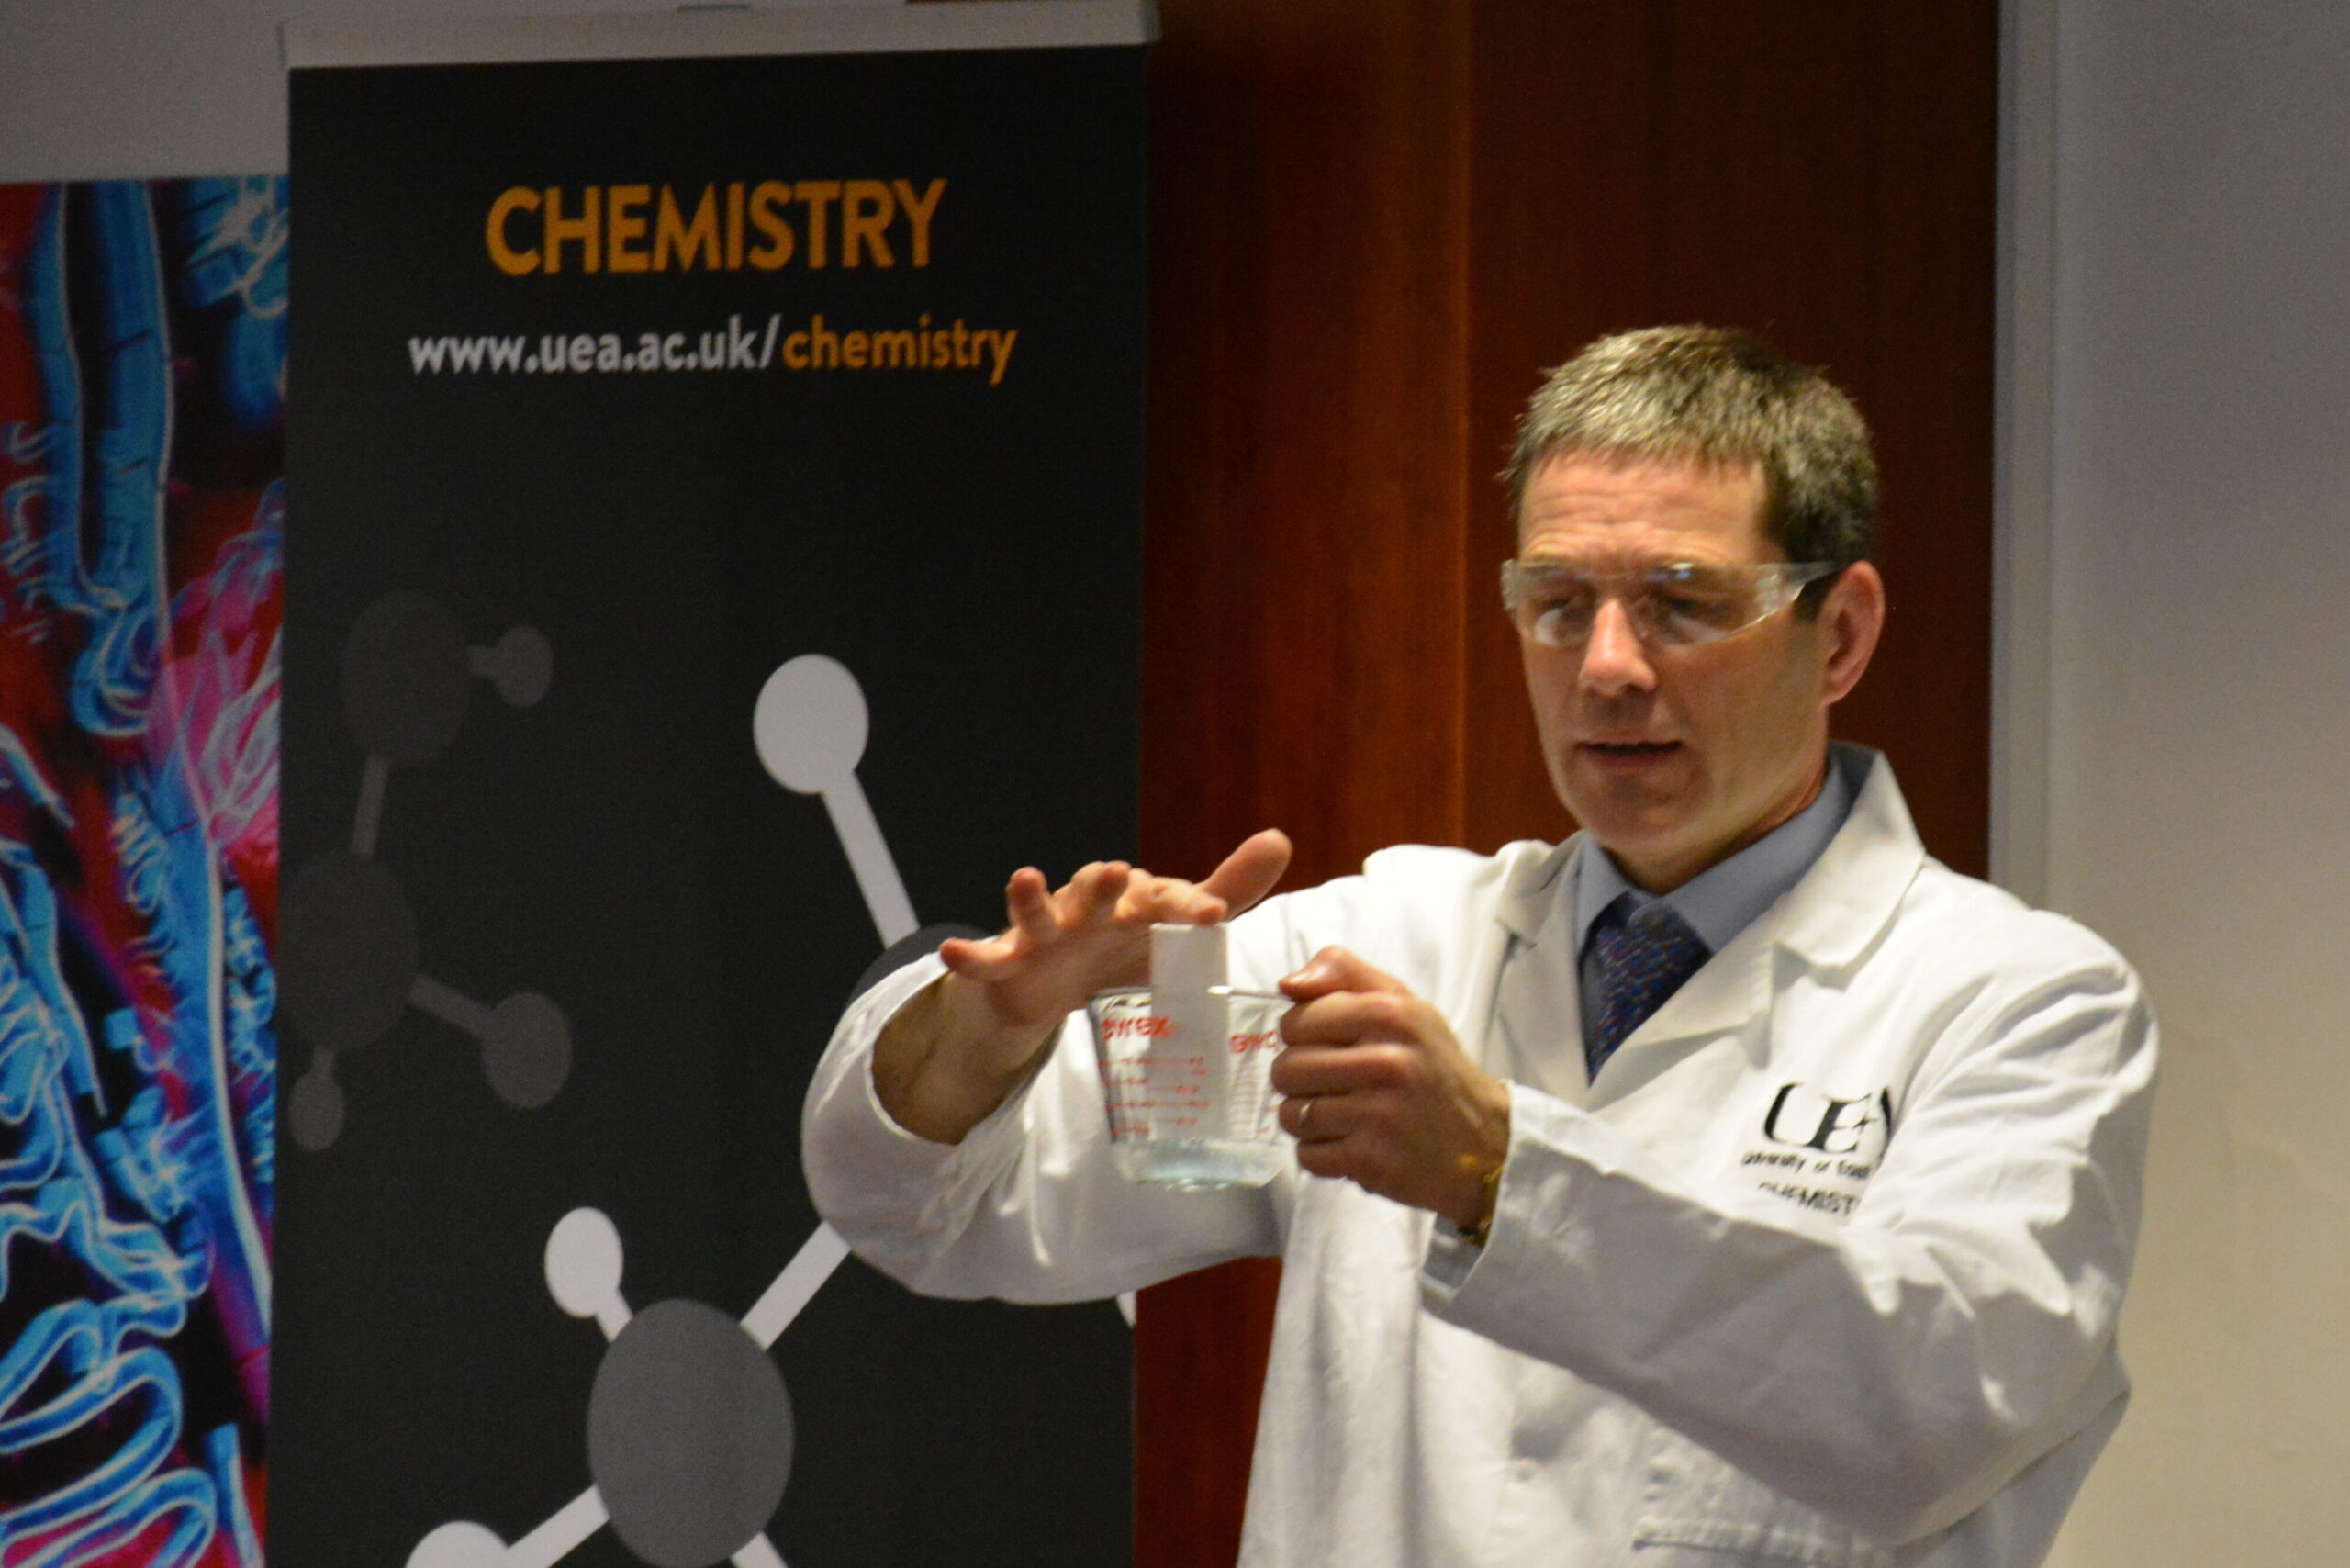 A chemistry demonstration in action